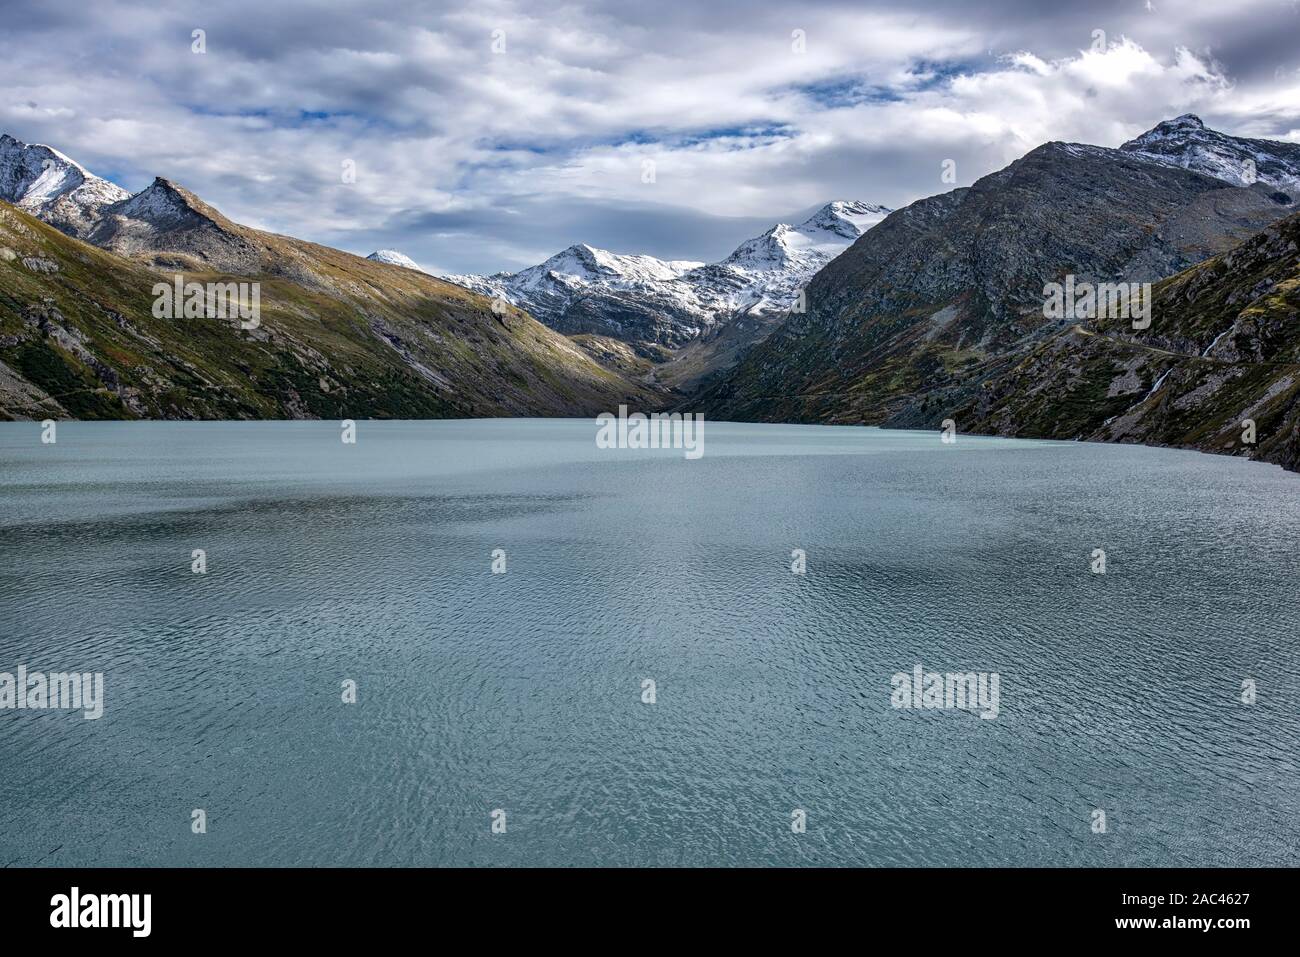 Mattmark Dam in Switzerland at the end of Saas Fee Valley Stock Photo